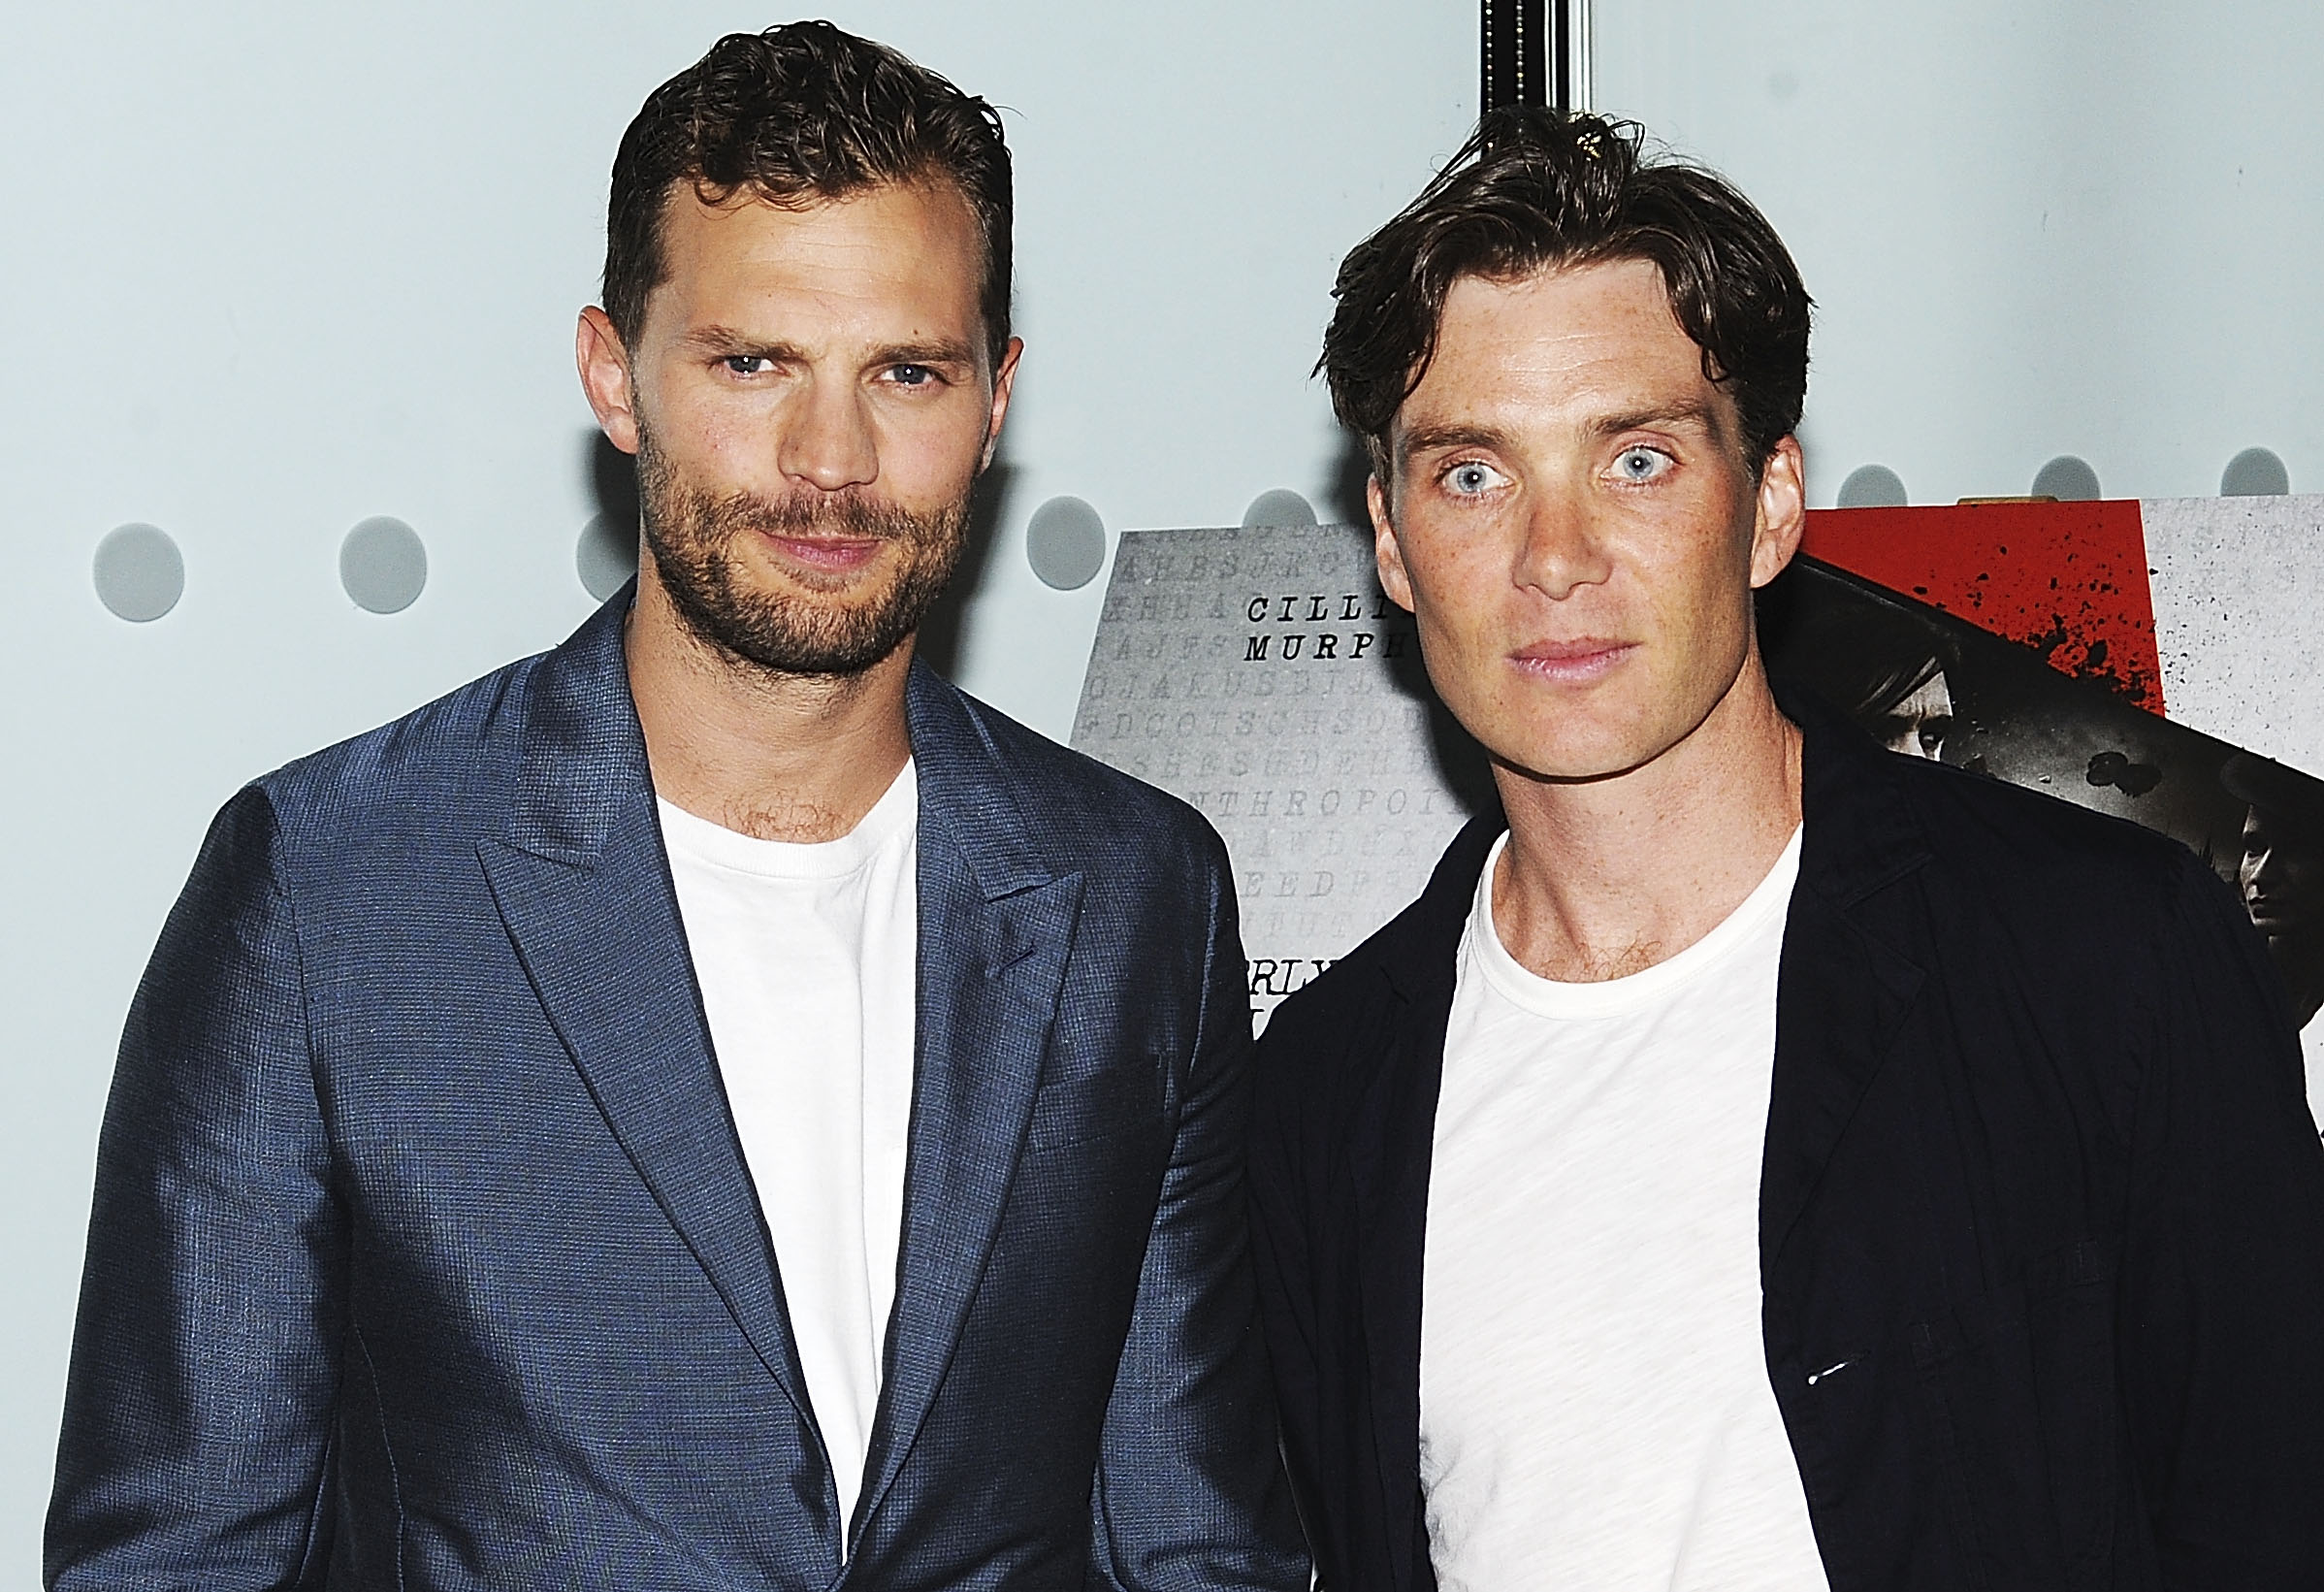 Jamie Dornan Loves How ‘Uncomfortable’ Cillian Murphy Gets in Interviews: ‘I Love to Play on That’